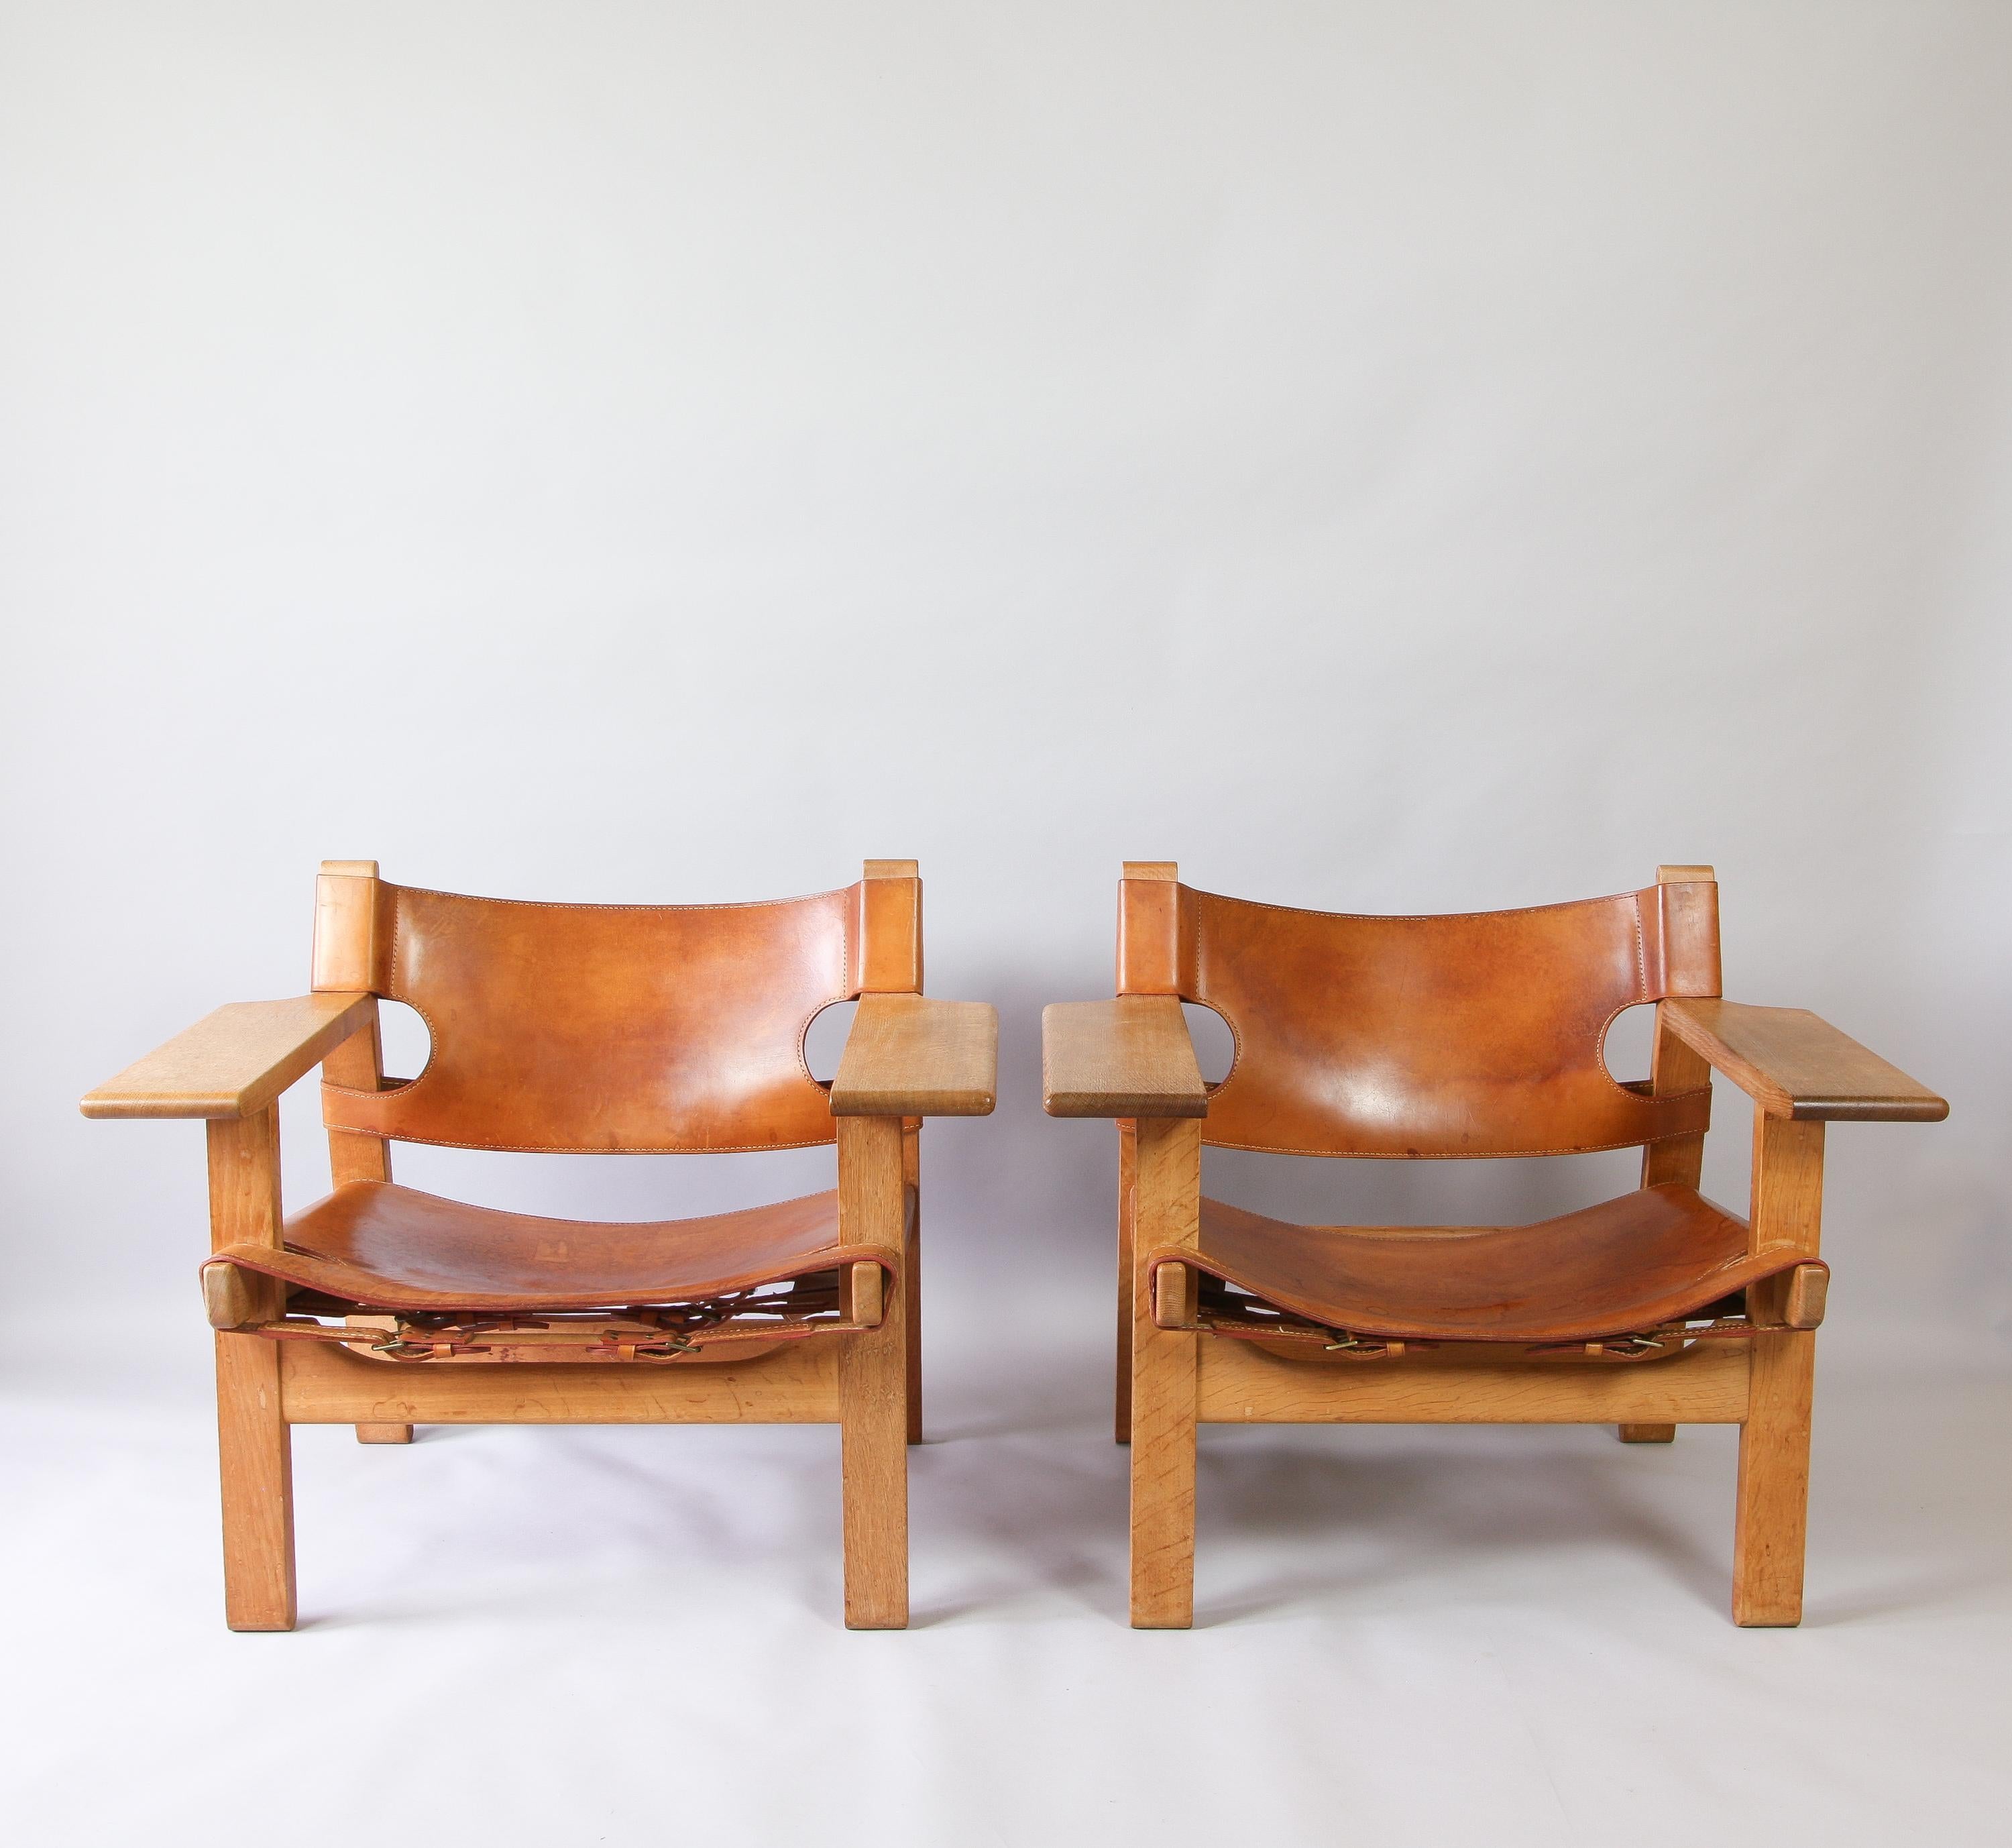 A fabulous pair of 1960s Børge Mogensen Spanish chairs for Fredericia. Designed in 1958, constructed in cognac saddle leather and solid oak. Great vintage condition and patina.